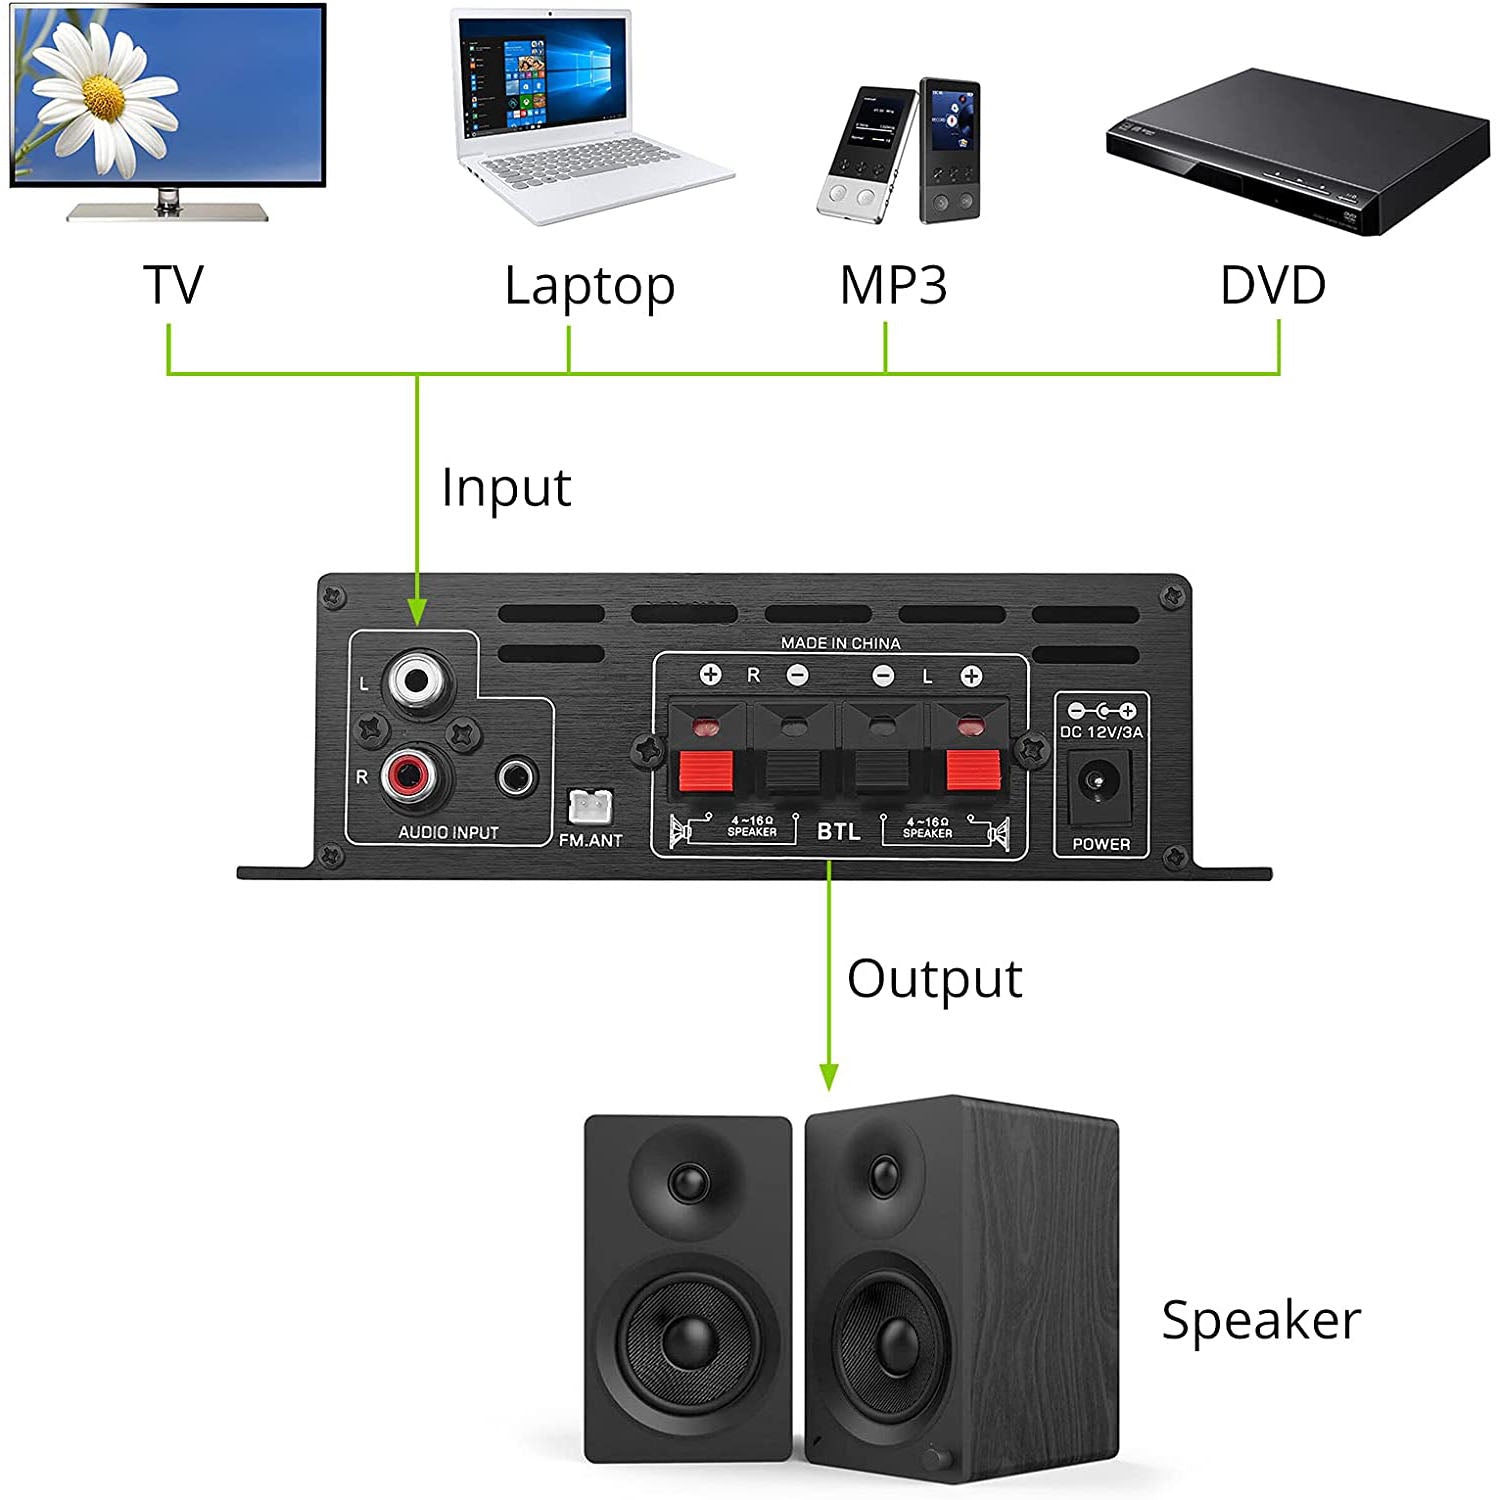 LiNKFOR Stereo Audio Power Amplifier with Bluetooth 5.0 Receiver